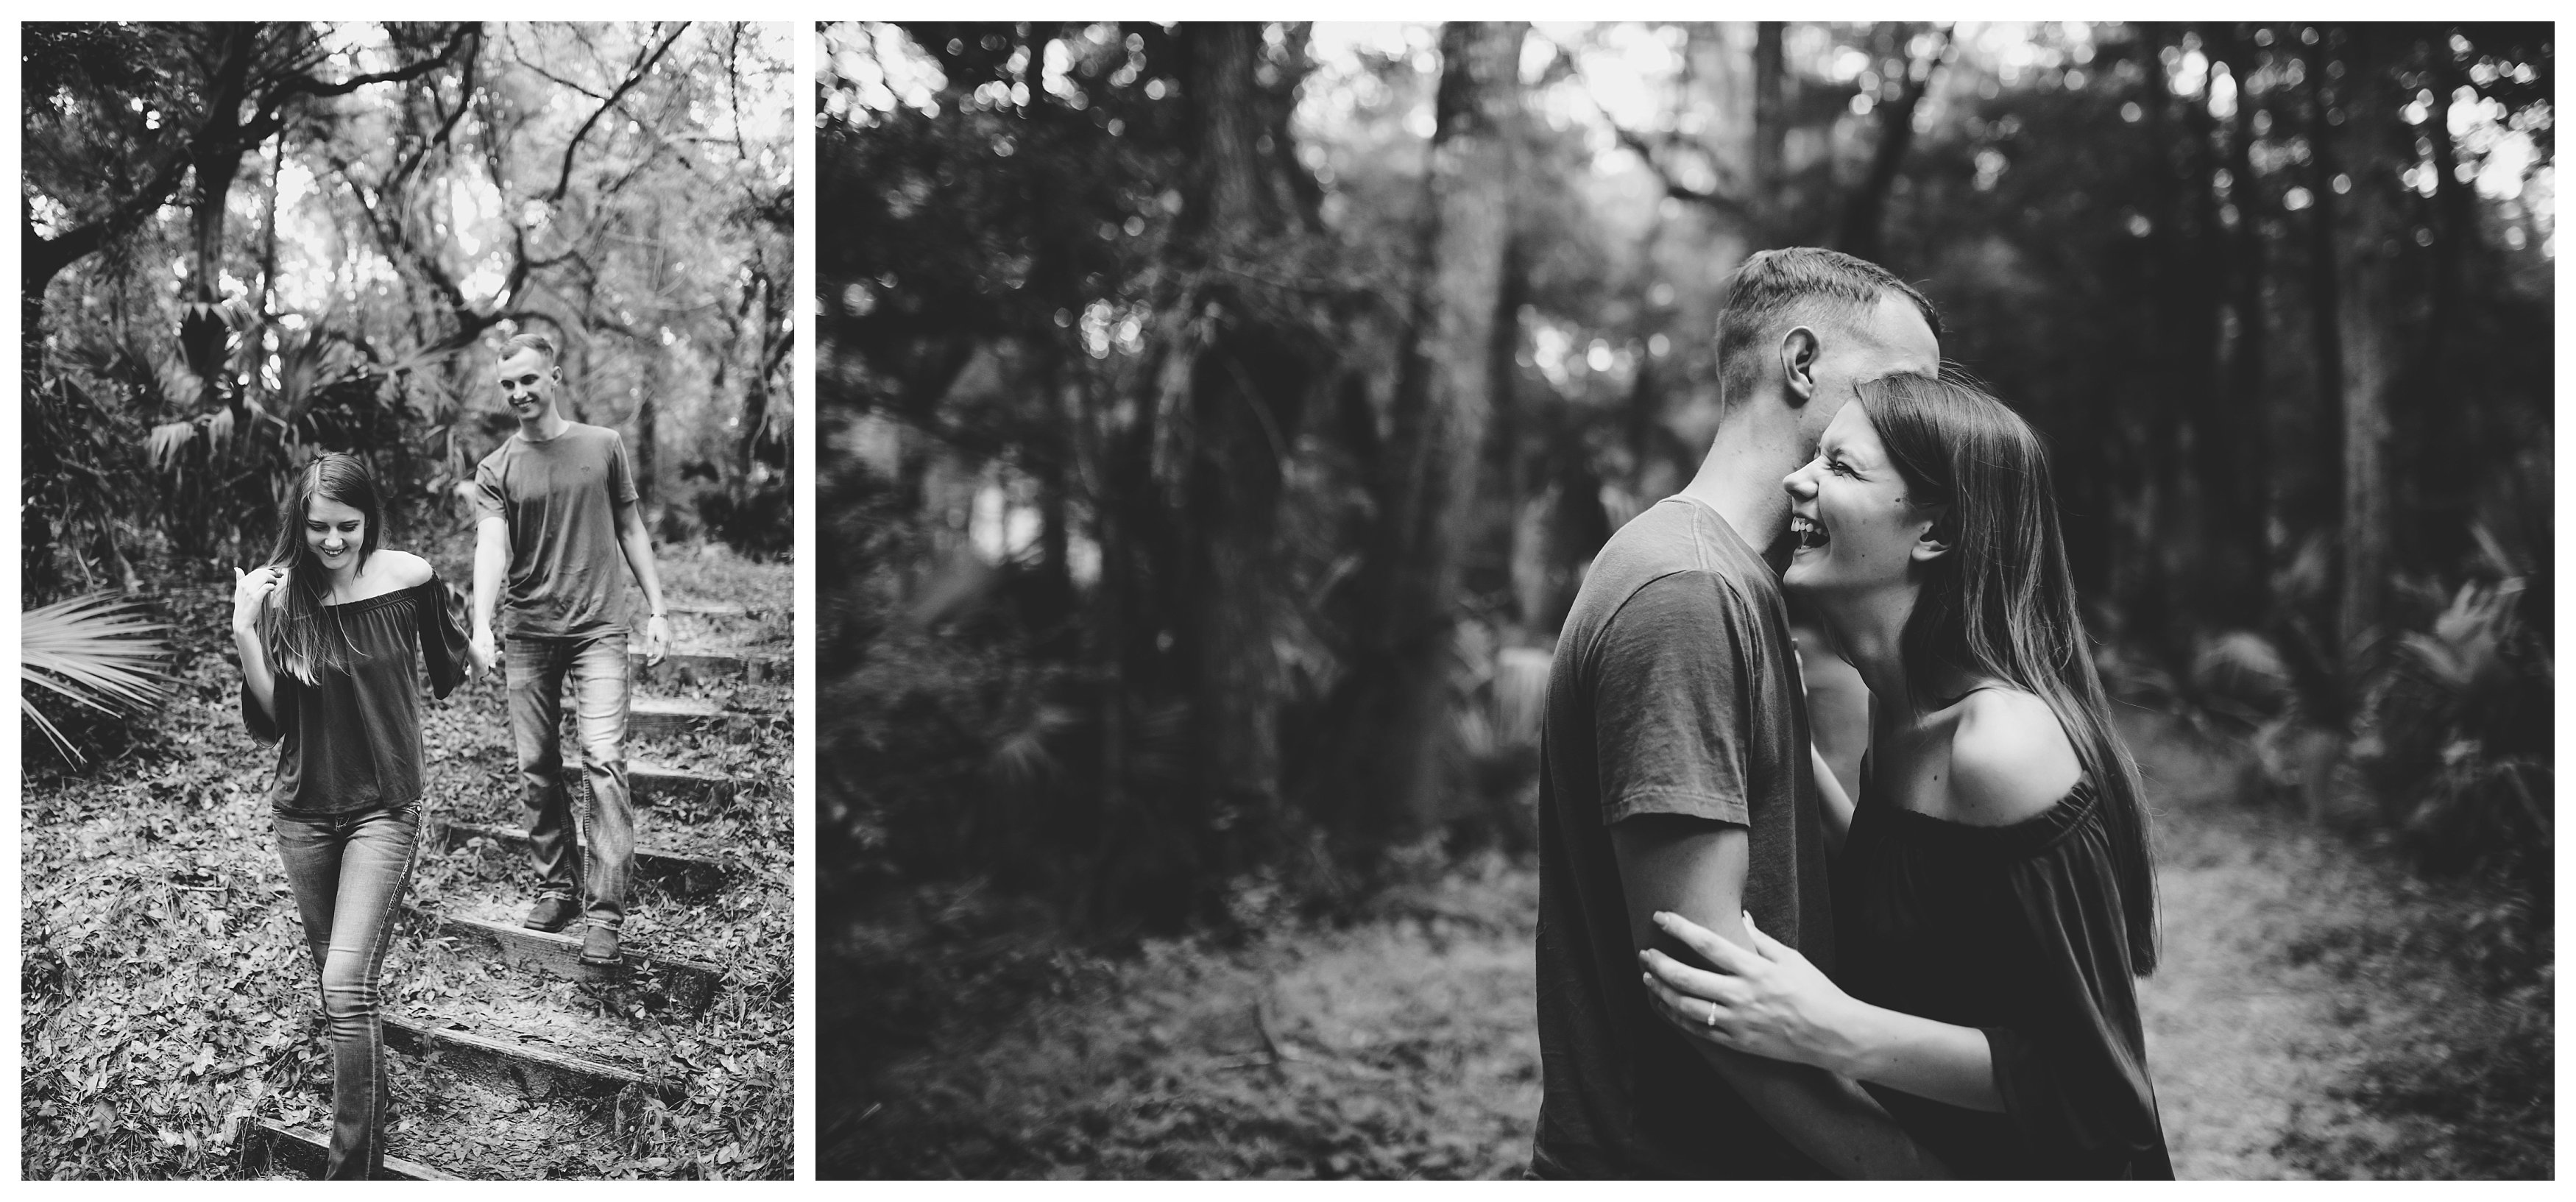 Lifestyle couples photos in Live Oak, FL for newly engaged people.